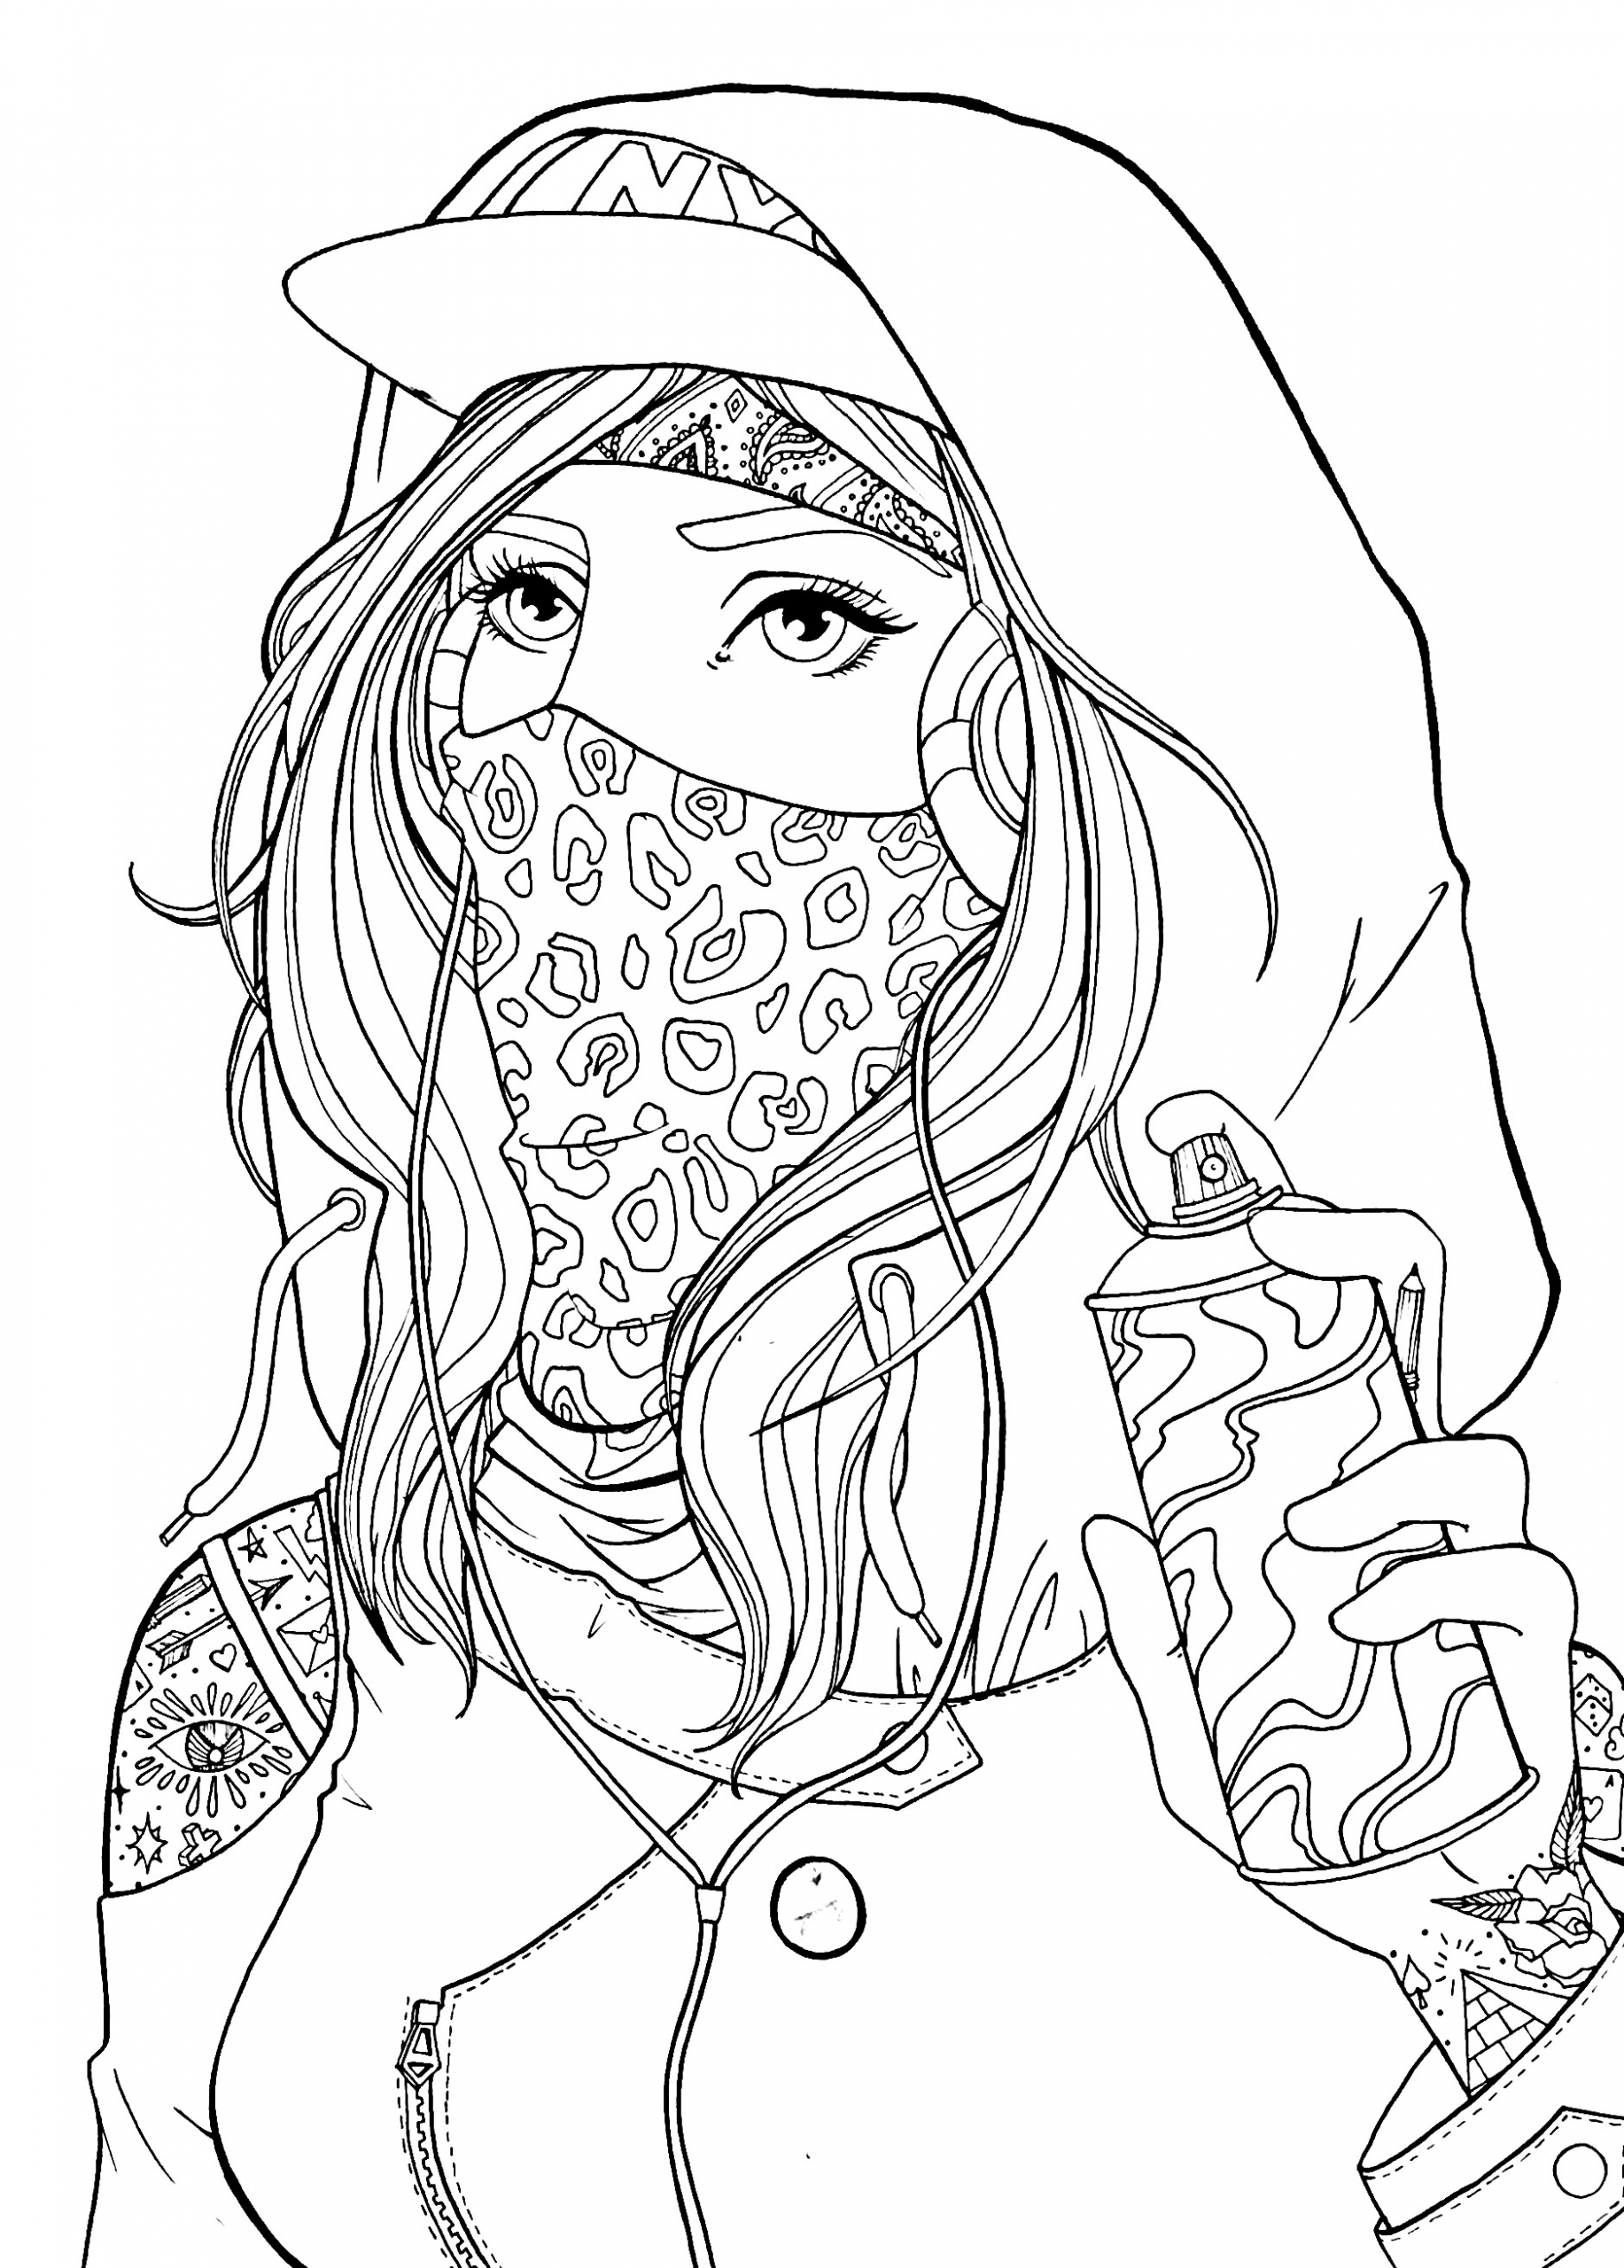 Coloring Pages For Adults Girls
 Graffiti girl drawing lineart